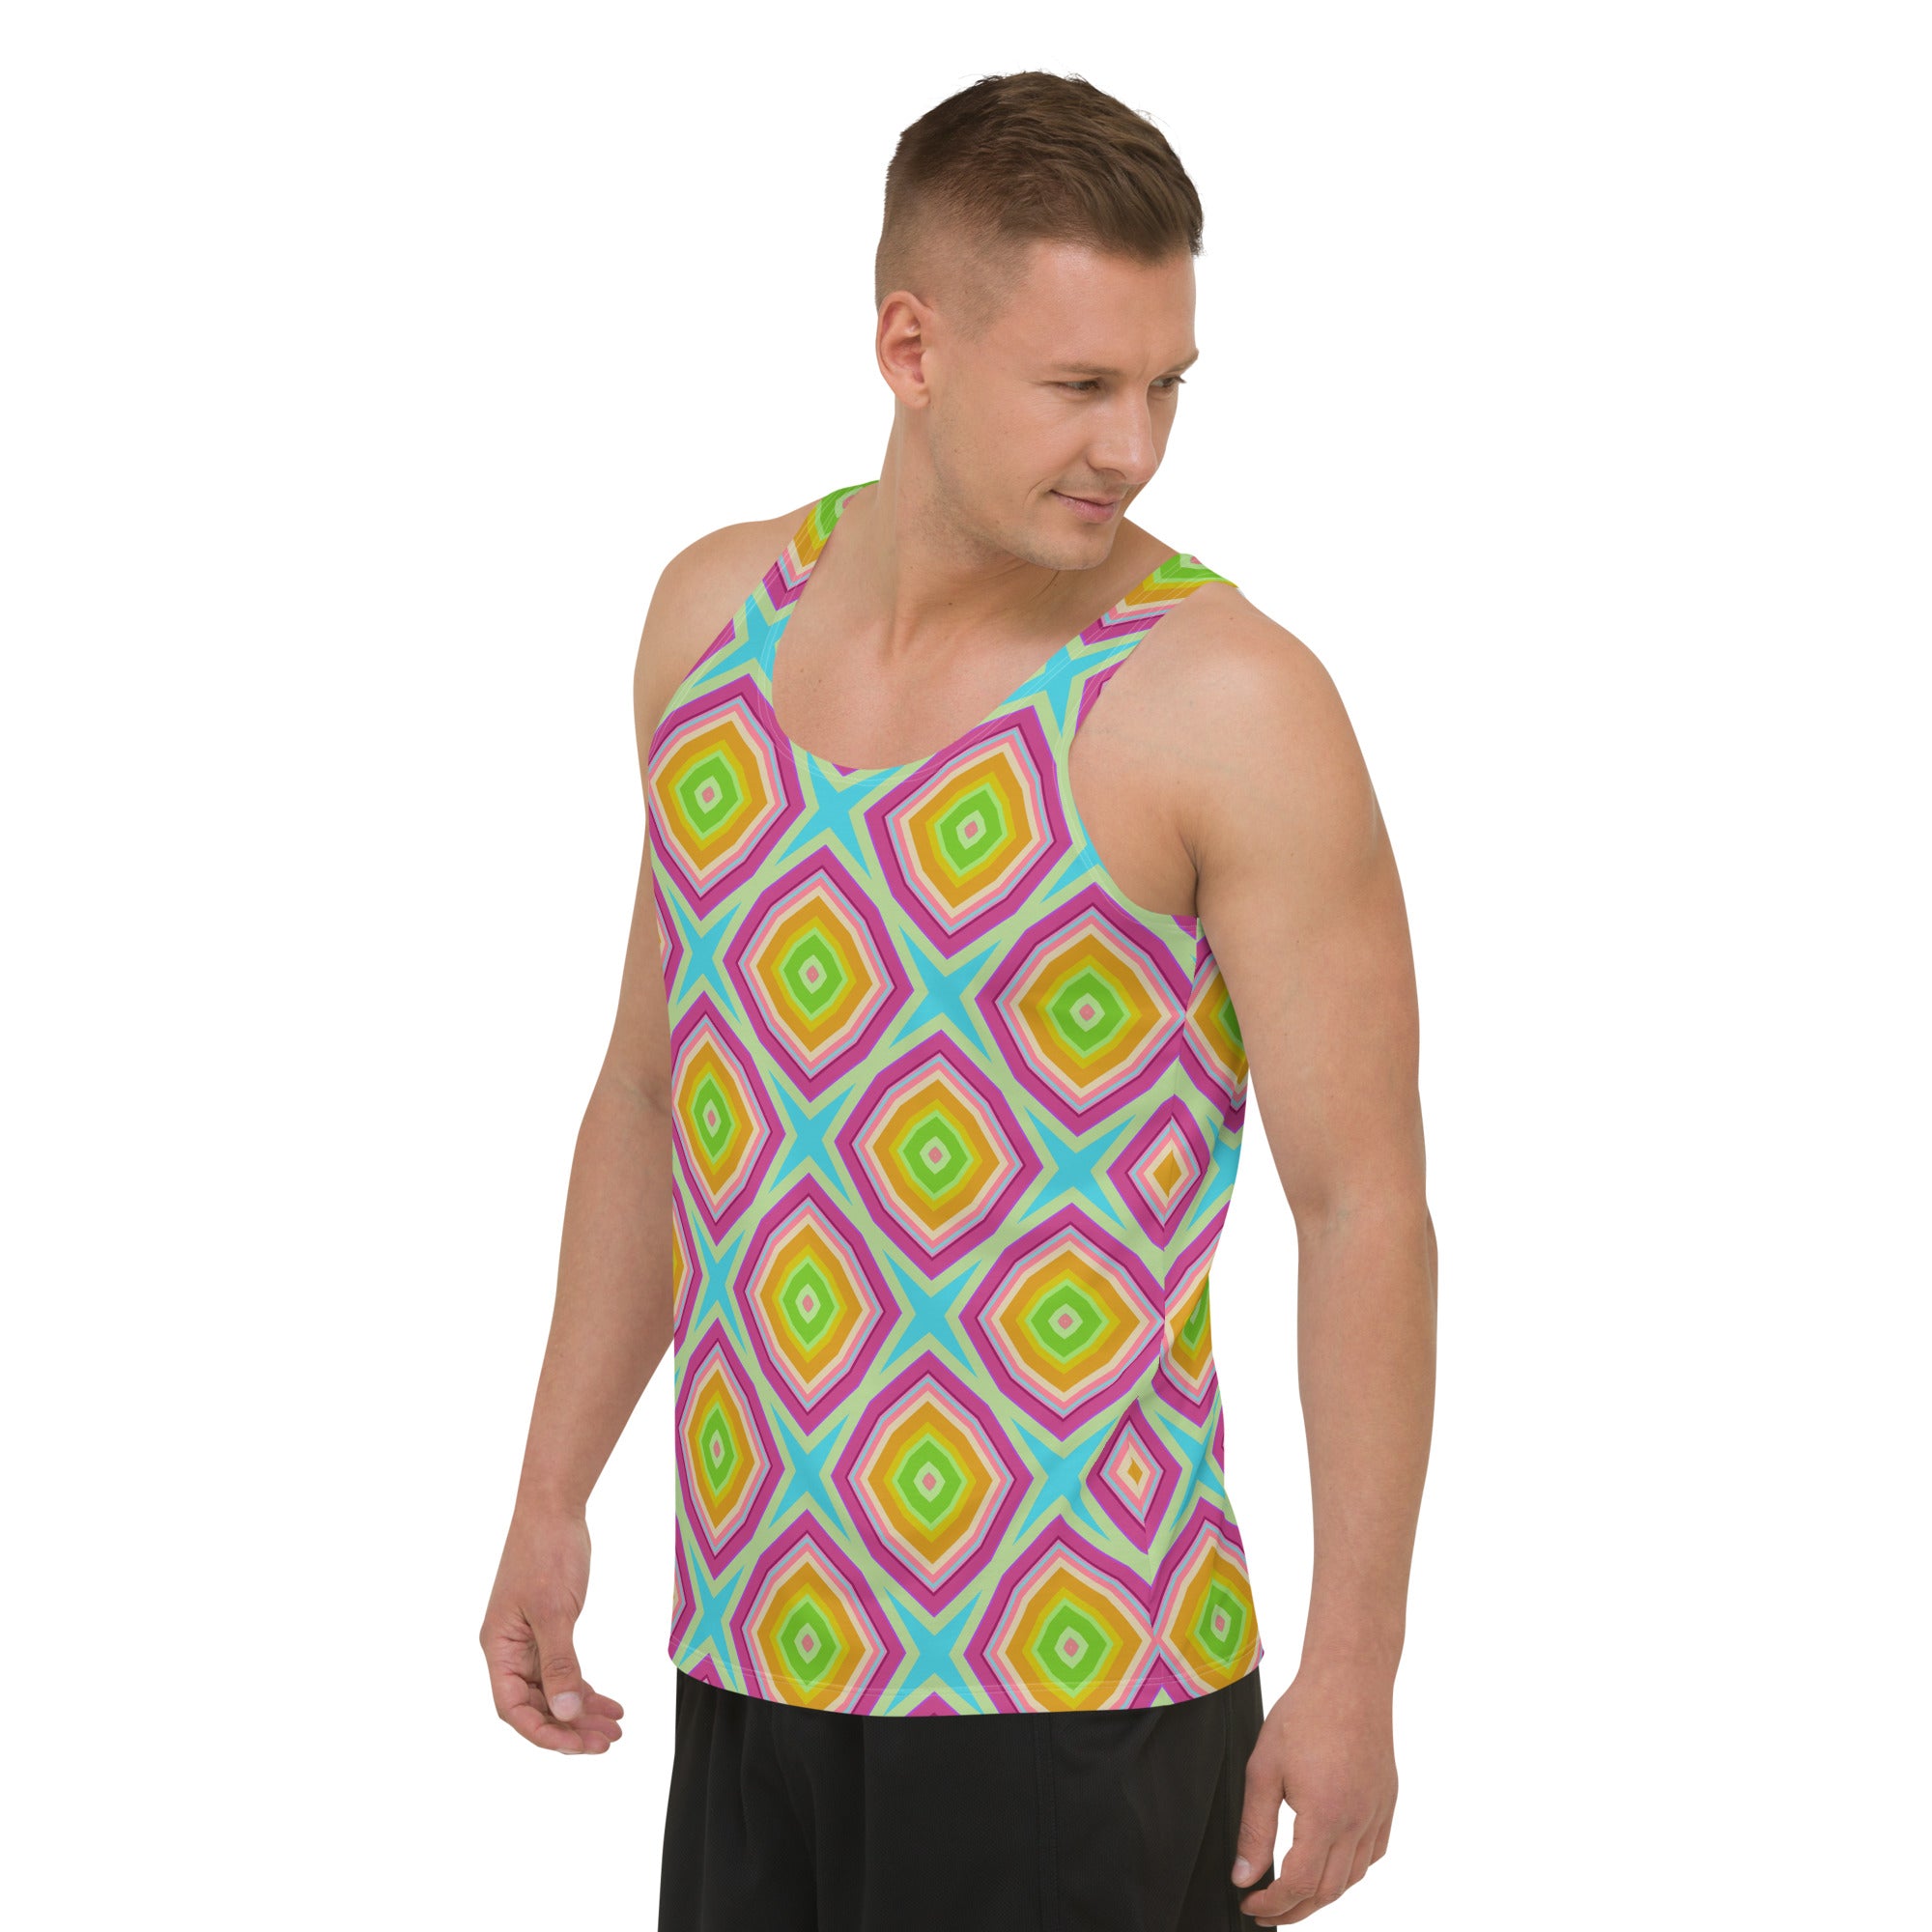 Fashionable men's tank top with optical illusion print